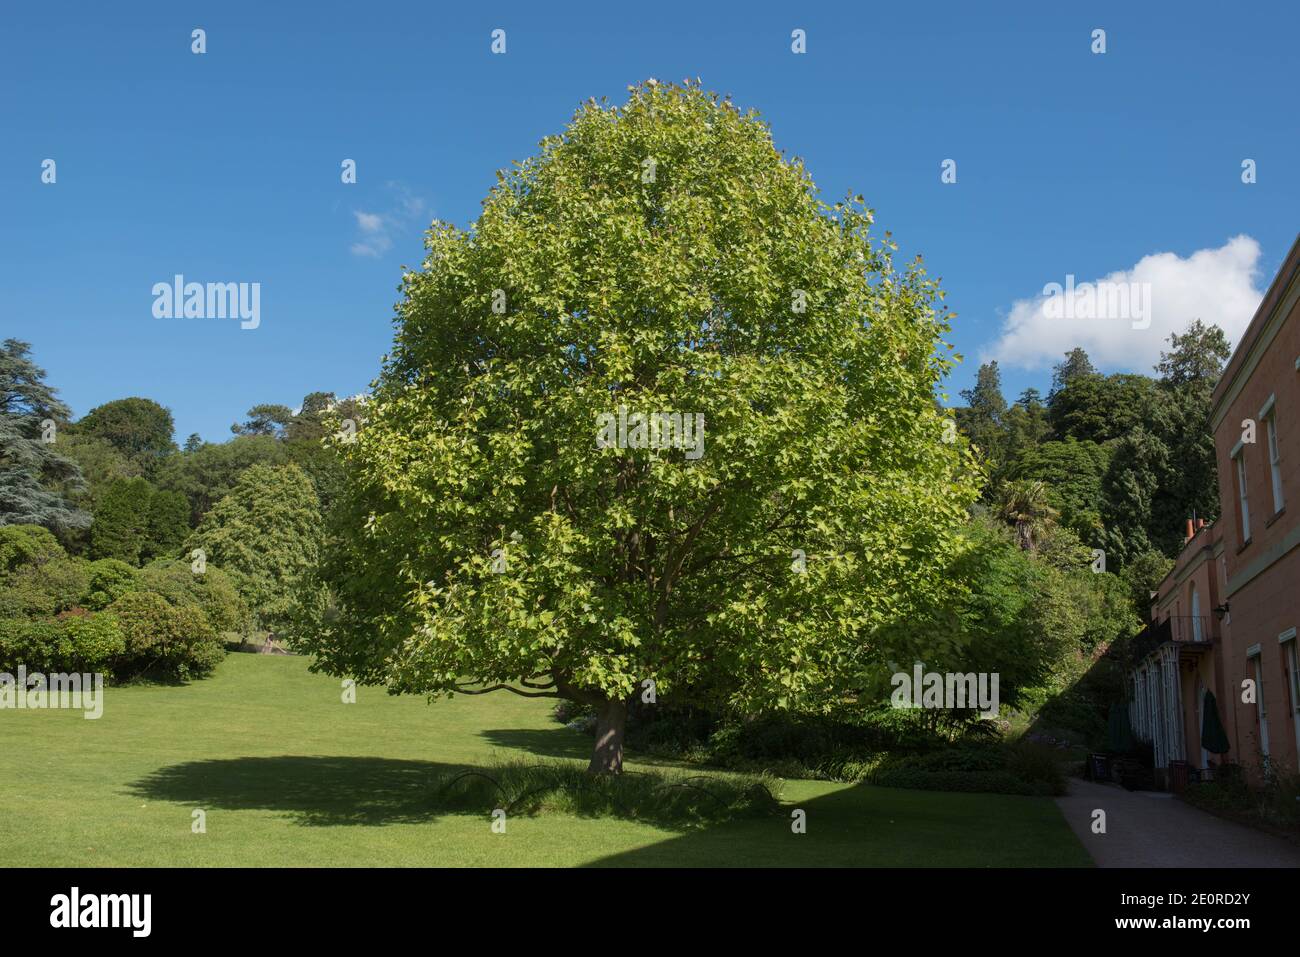 Summer Foliage of a Deciduous Chinese Tulip Tree (Liriodendron chinense) Growing in a Garden with a Bright Blue Sky Background in Rural Devon Stock Photo